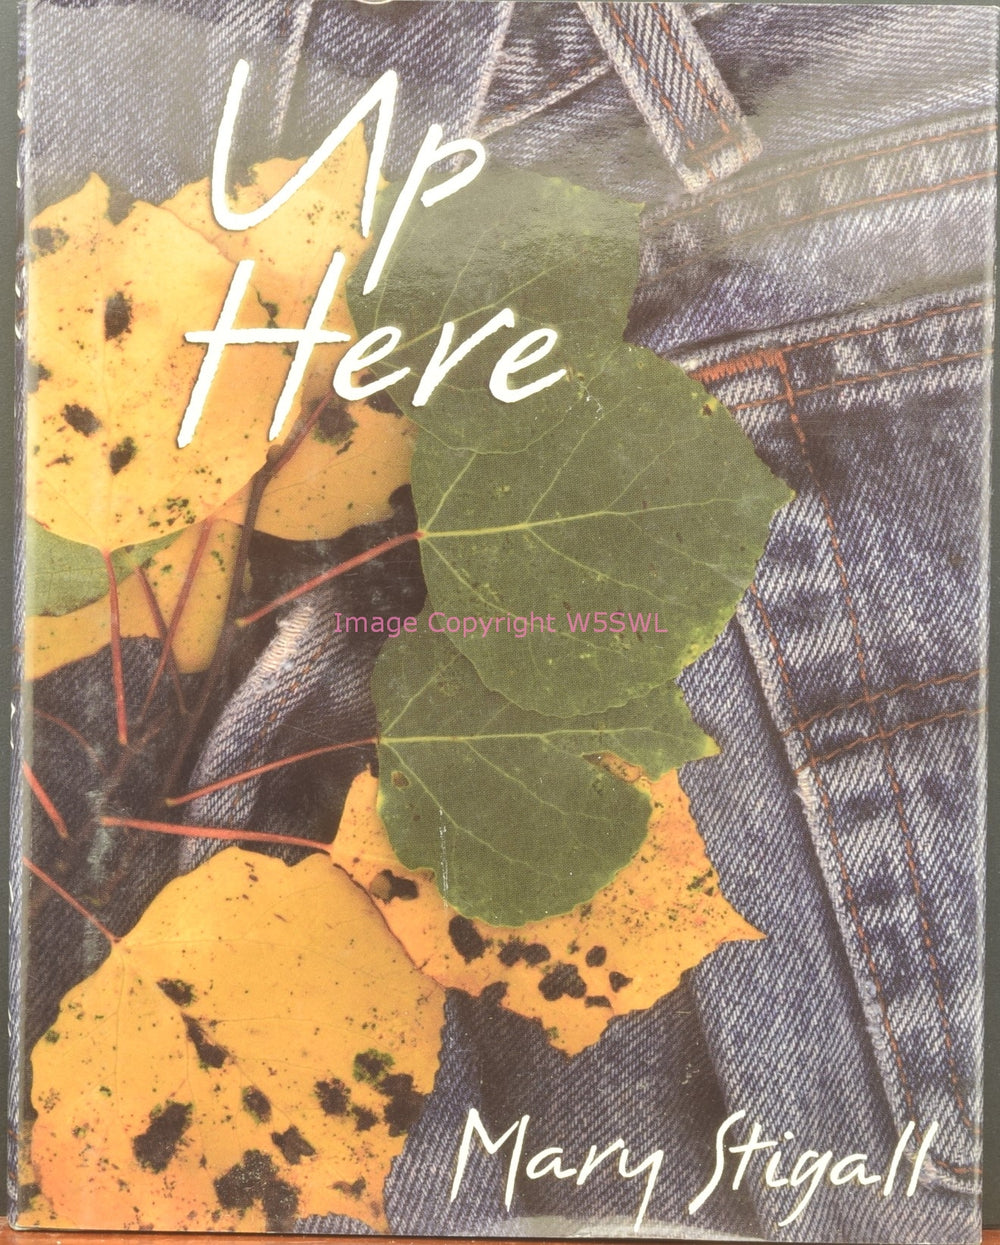 Up Here by Mary Stigall - Dave's Hobby Shop by W5SWL